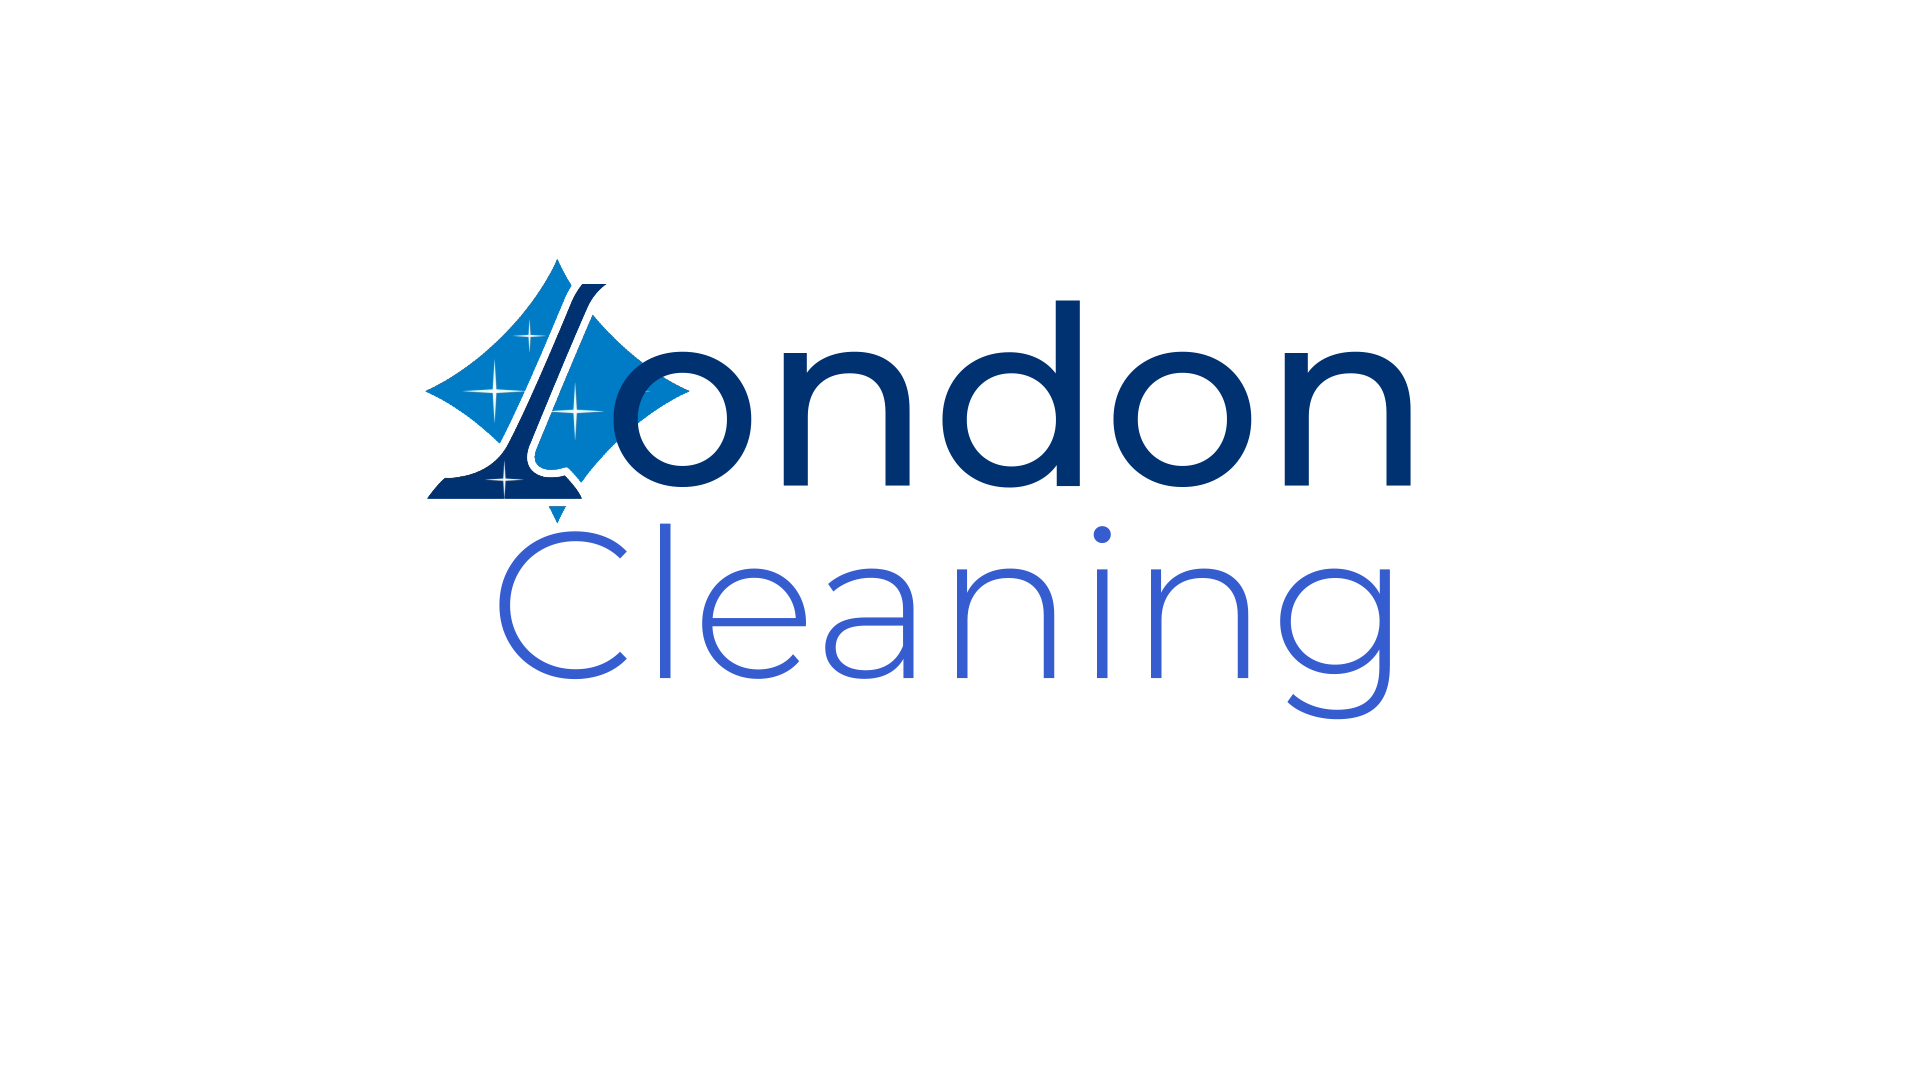 London Cleaning